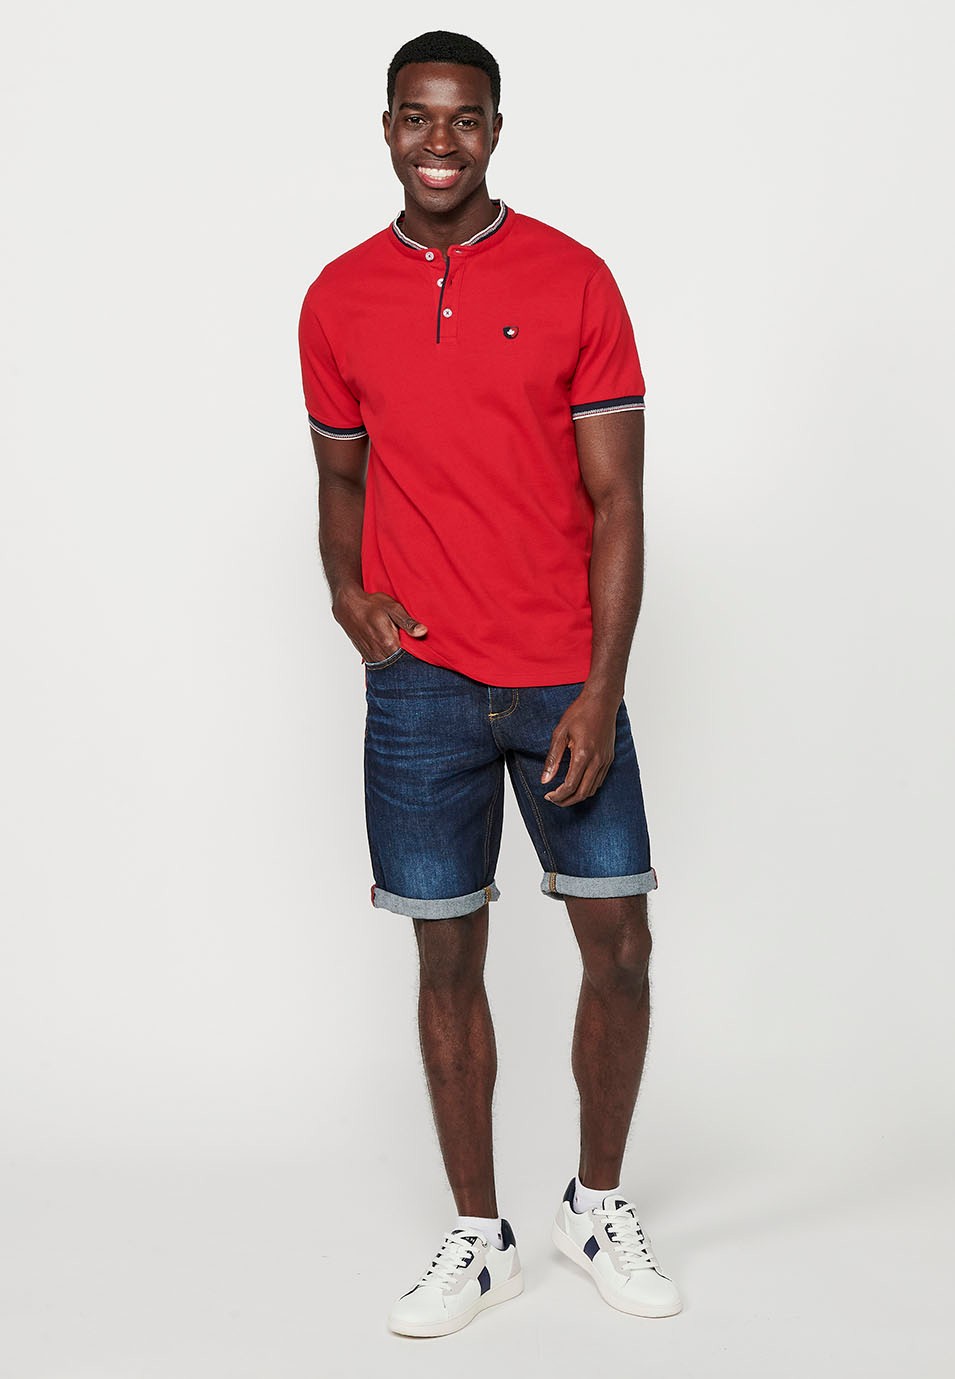 Short-sleeved cotton polo shirt finished in rib with a round neck with buttoned opening and textured with side slits in Red for Men 1